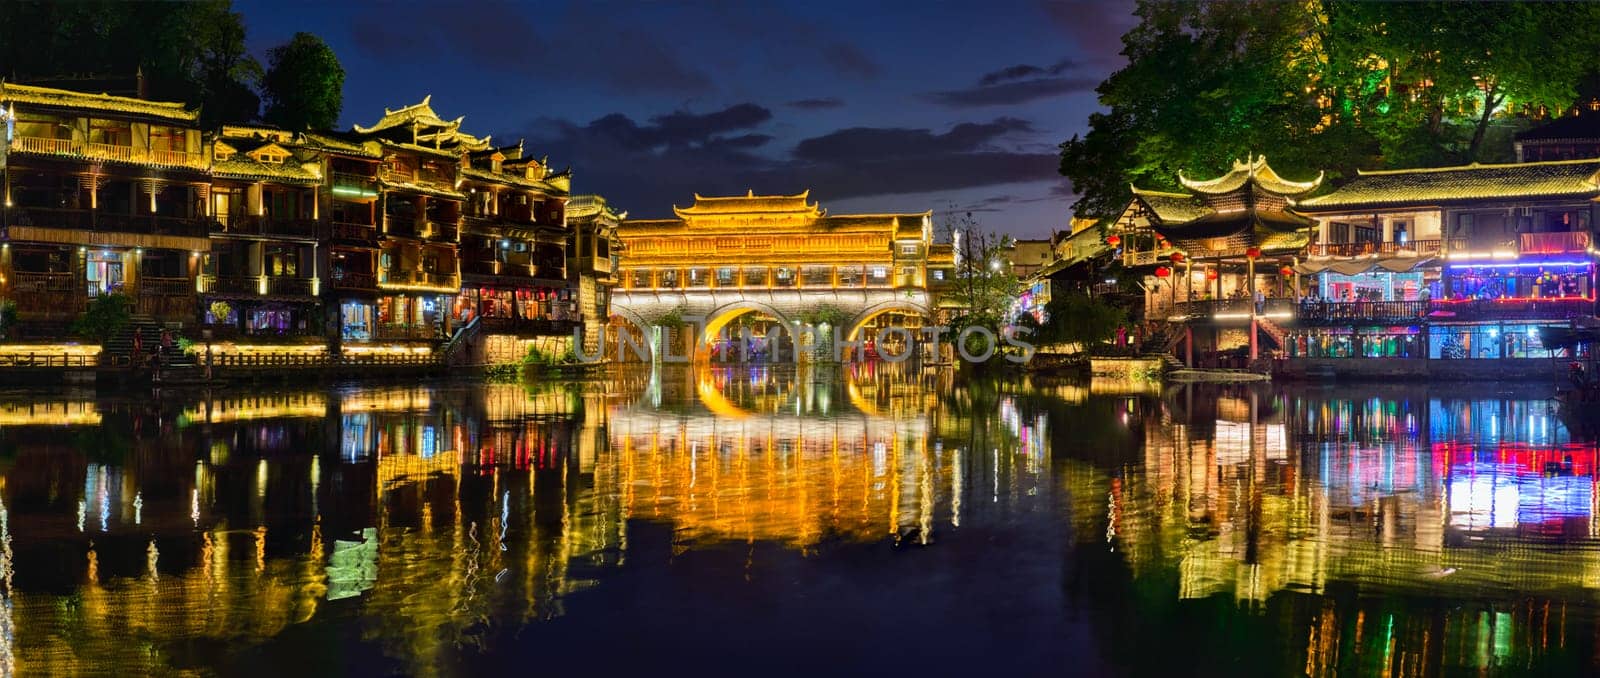 Feng Huang Ancient Town Phoenix Ancient Town , China by dimol